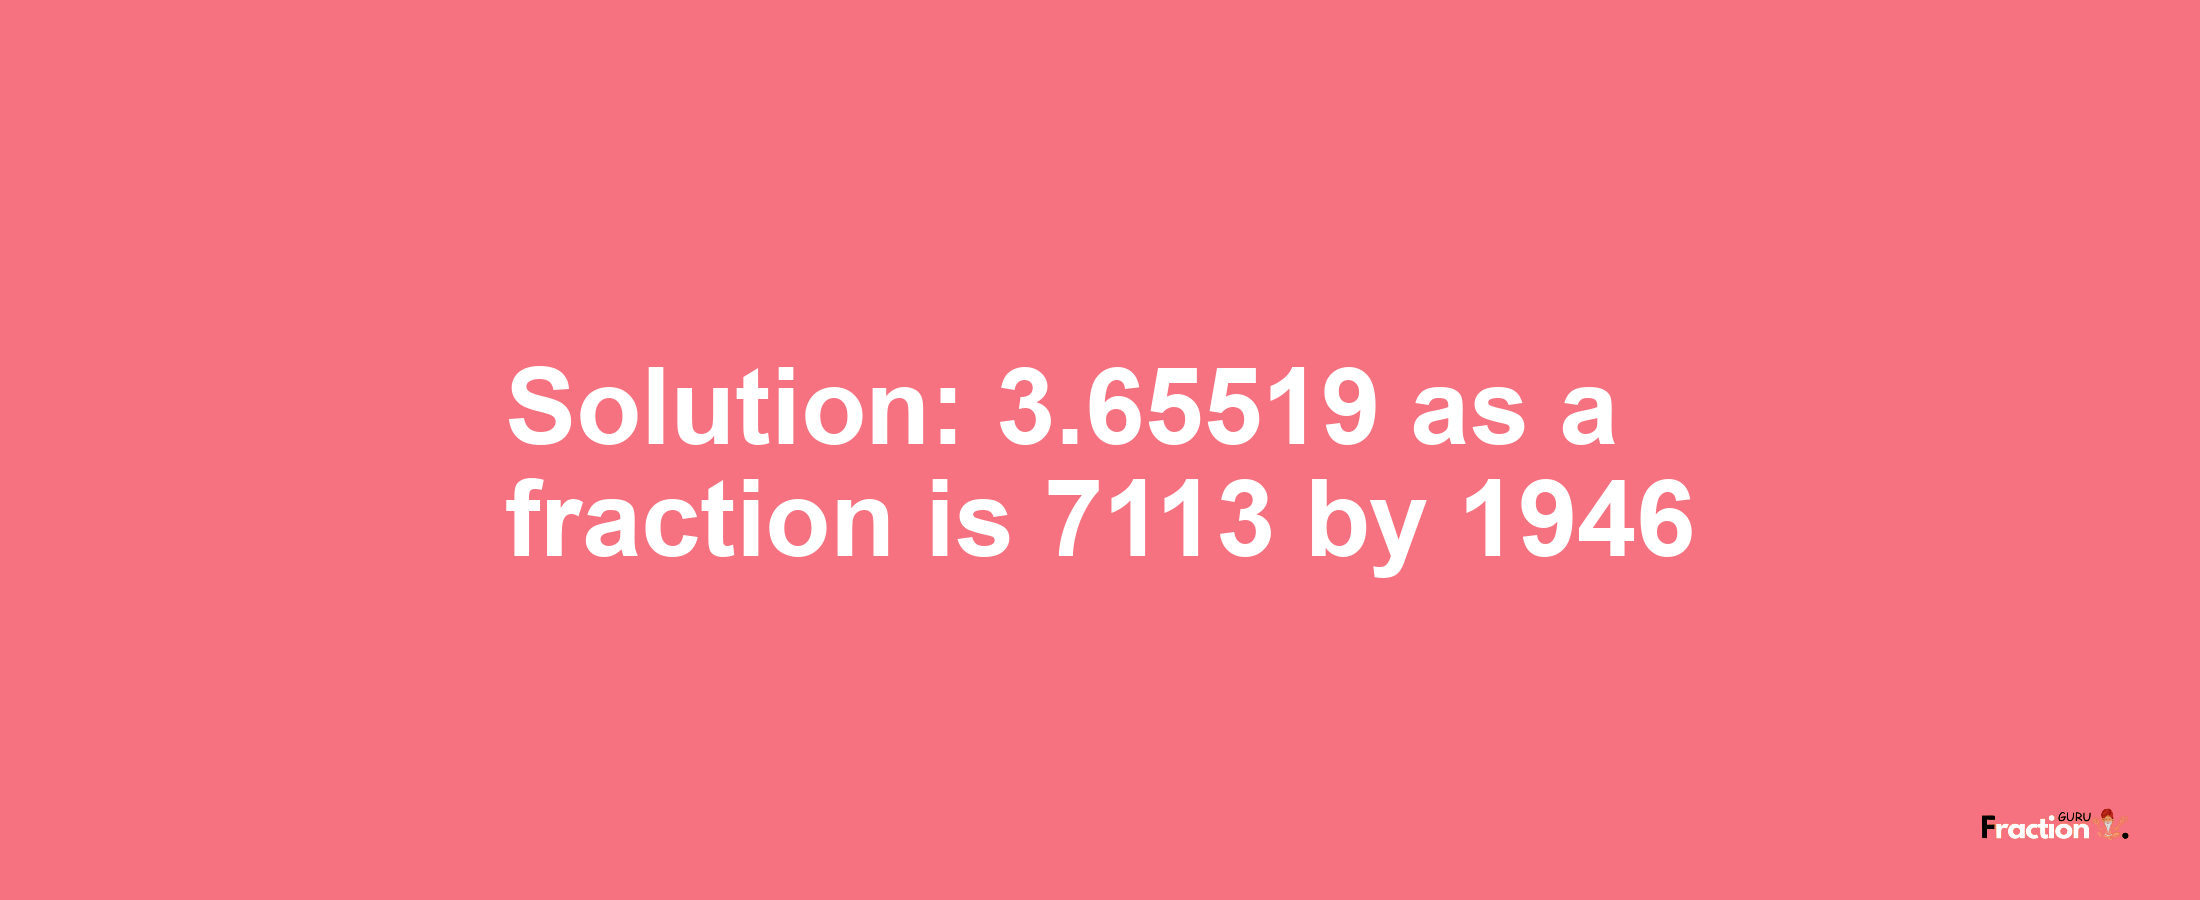 Solution:3.65519 as a fraction is 7113/1946